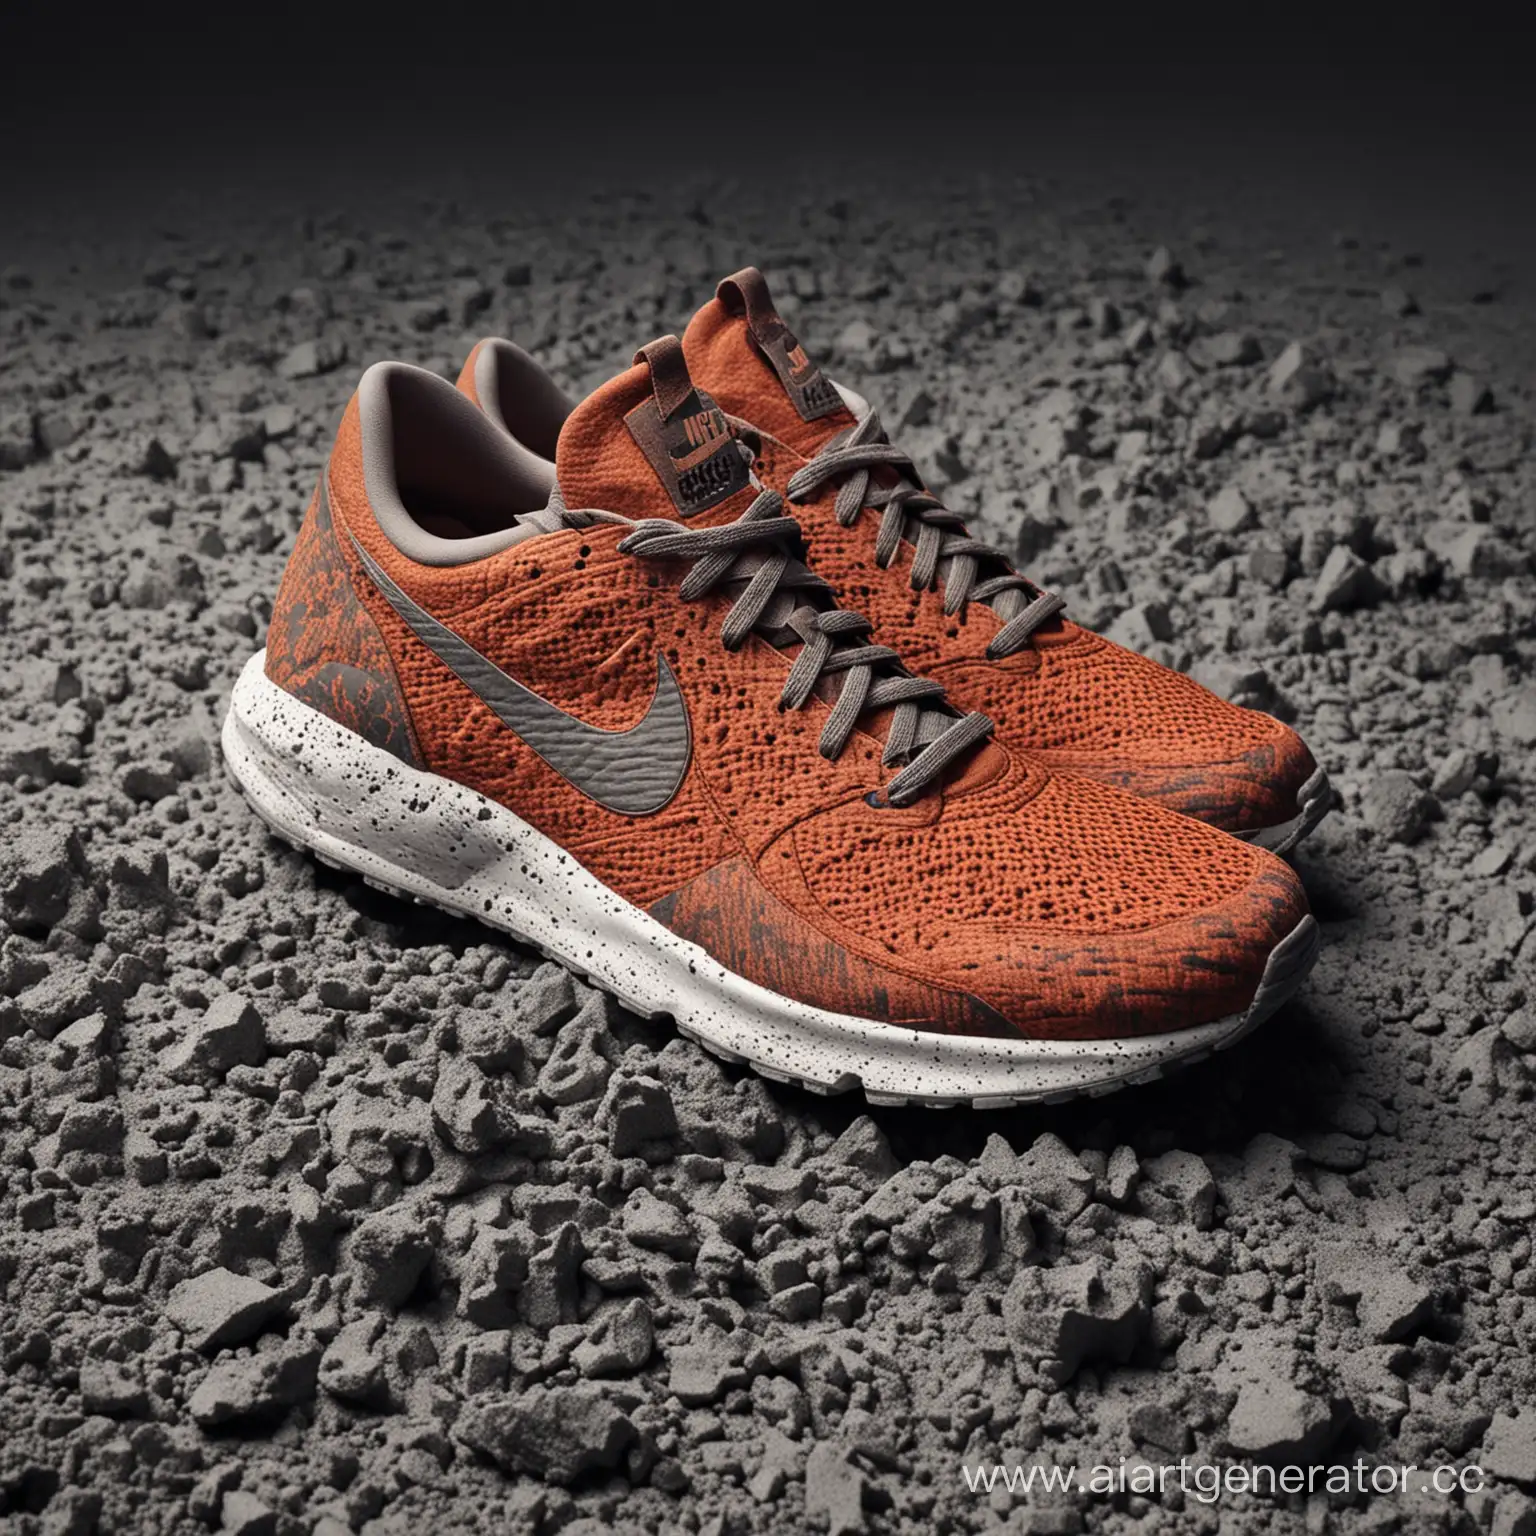 Nike-Sneakers-with-Volcanic-Eruption-Texture-and-Pattern